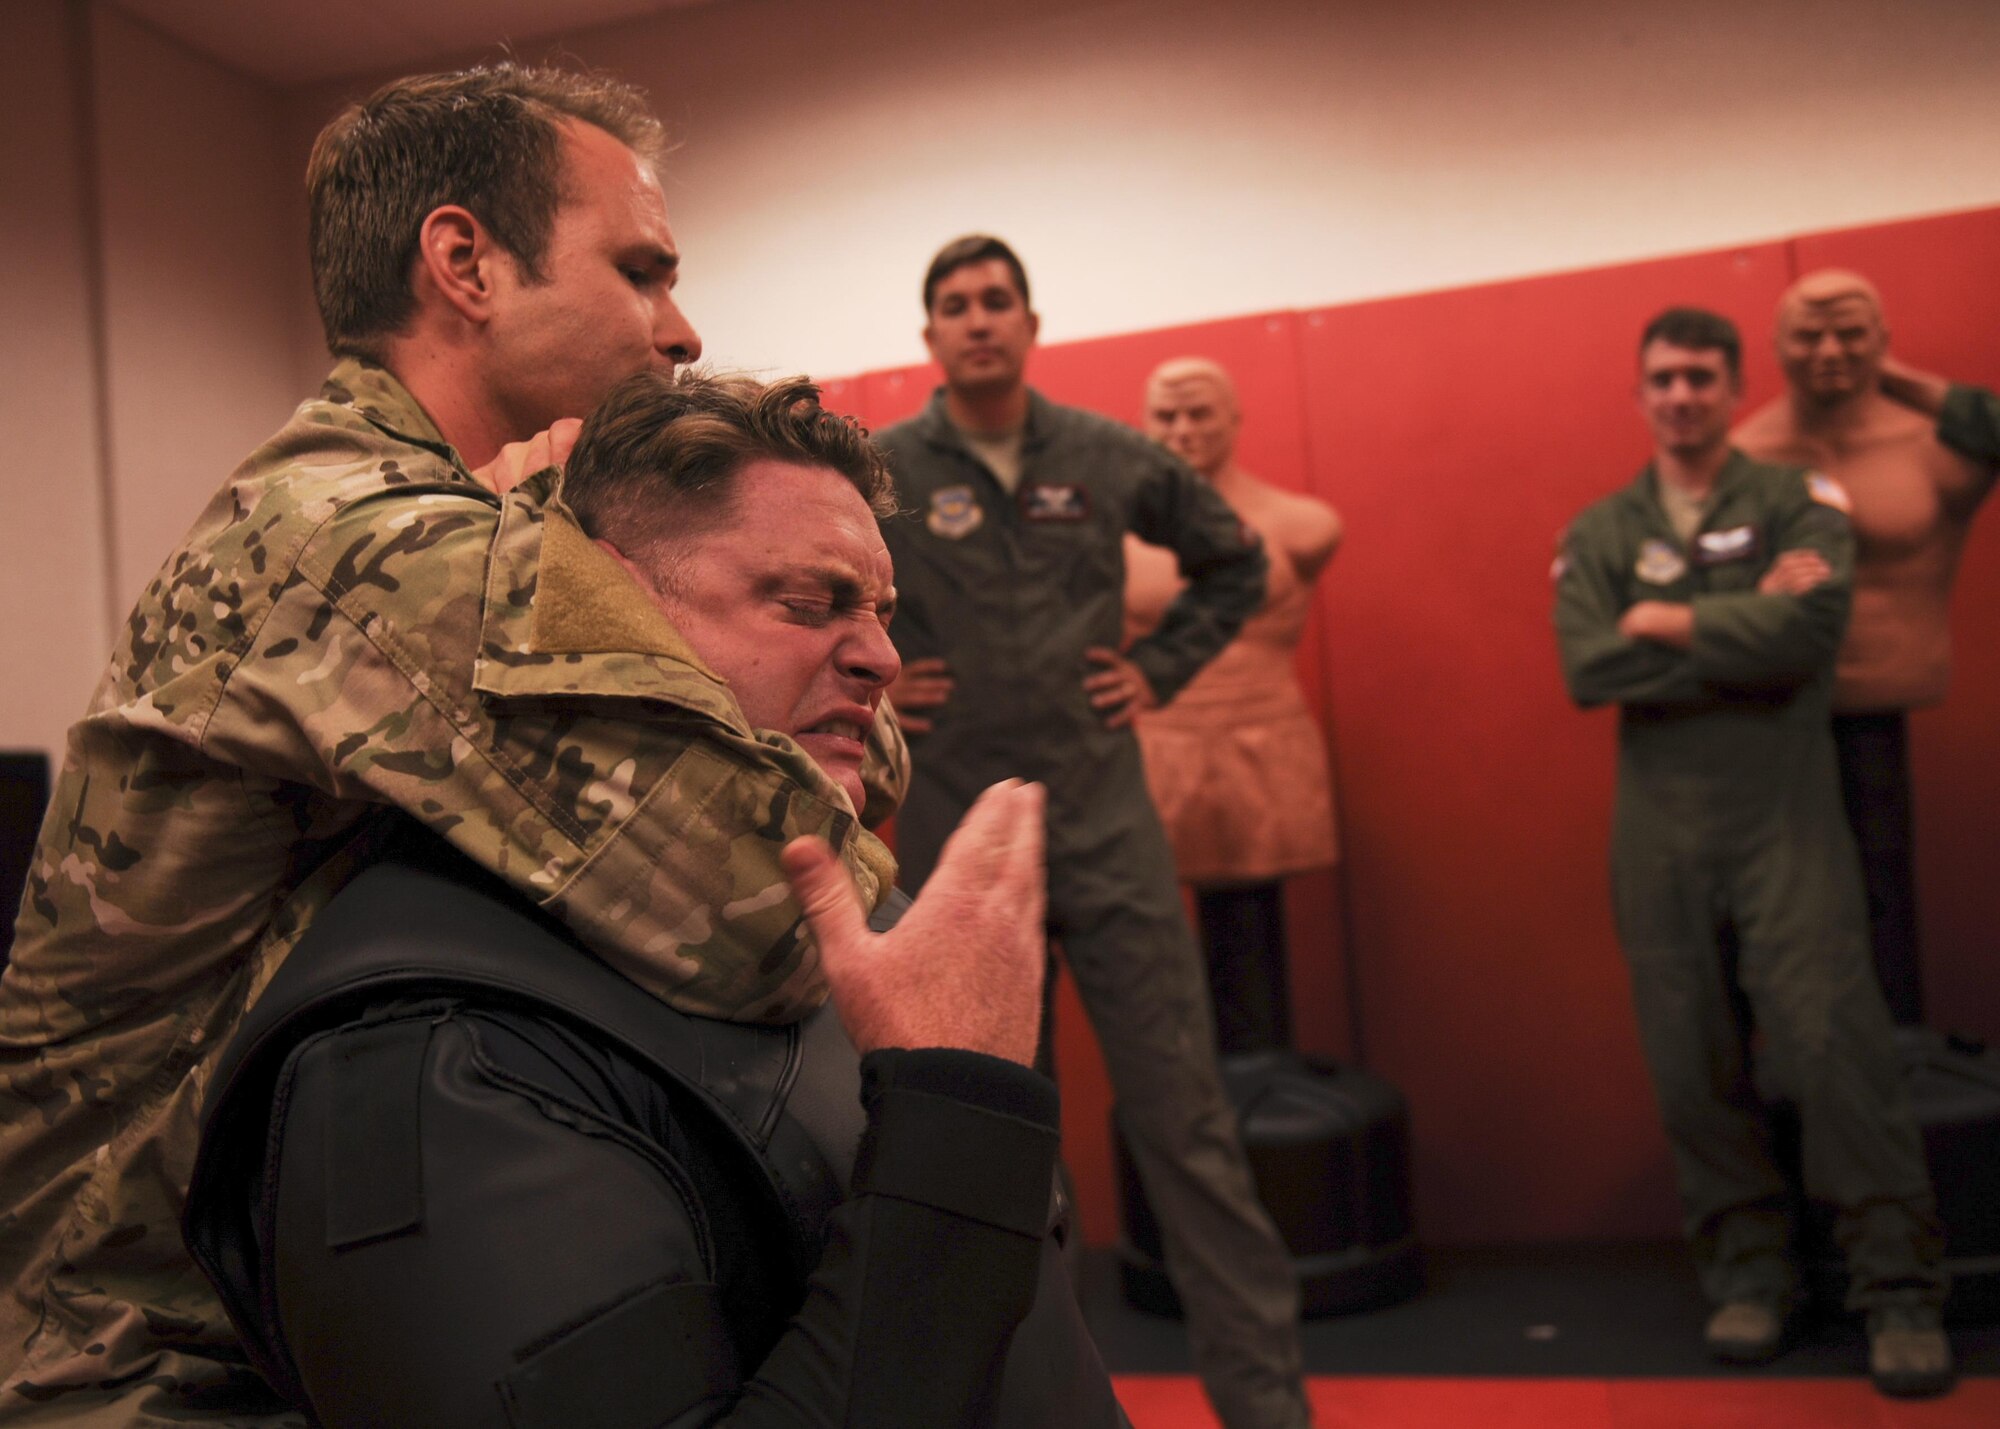 U.S. Air Force Tech. Sgt. Jerrod Mink and Master Sgt. Justin McCaffrey, 19th Operations Support Squadron survival, evasion, resistance and escape specialists demonstrate apprehension avoidance tactics to C-130J pilots from the 41st Airlift Squadron June 21, 2016, at Little Rock Air Force Base, Ark. Apprehension avoidance provides skills Airmen can use to maintain or regain their freedom.  (U.S. Air Force photo by Senior Airman Harry Brexel)